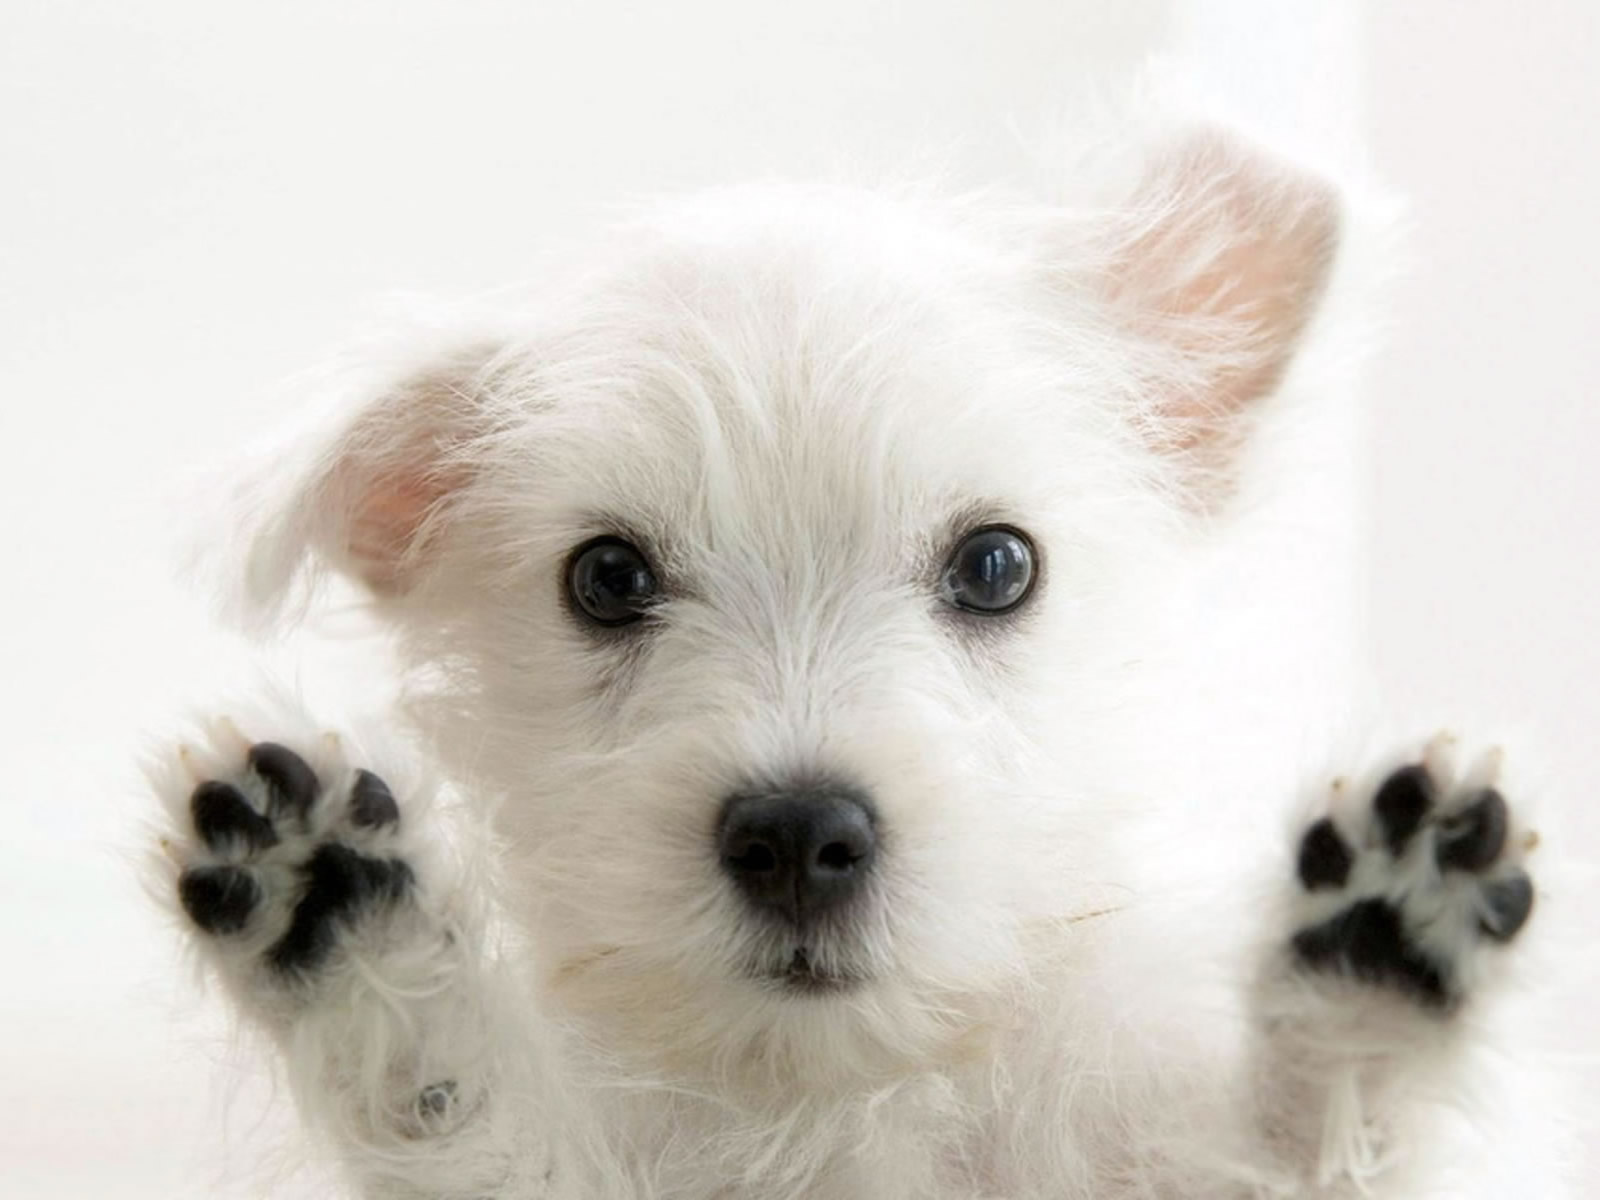 Cute White Dog Photo Wallpaper On This Dogs Background